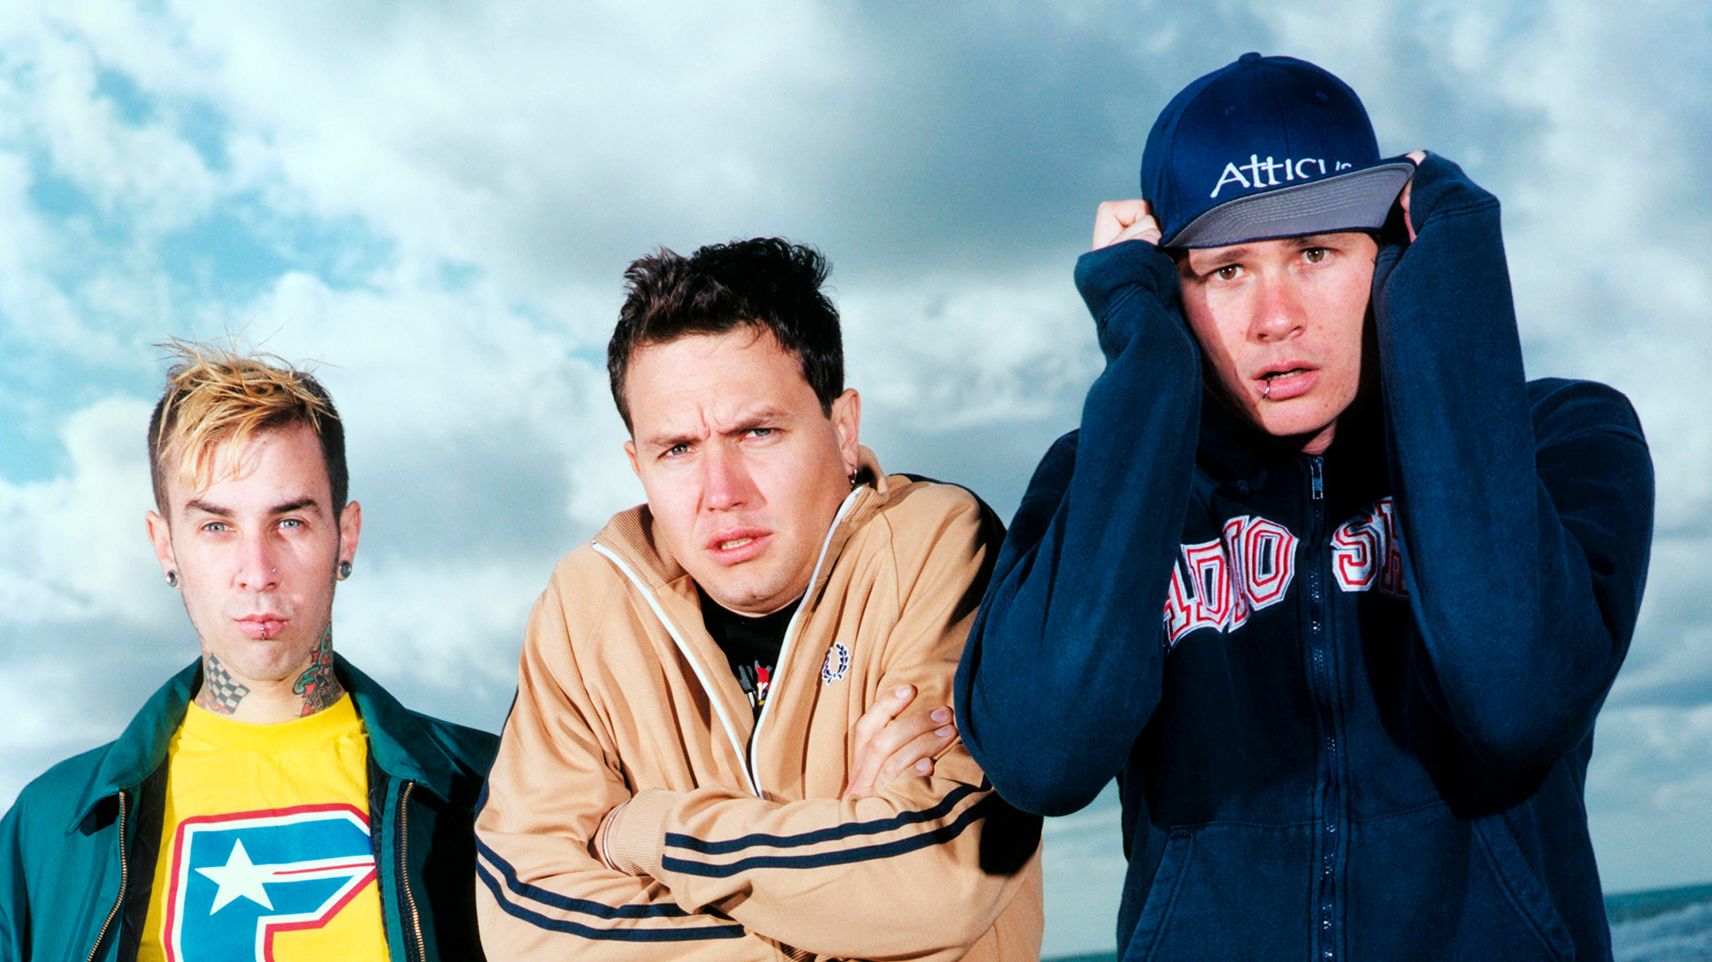 blink-182: A career timeline through the years